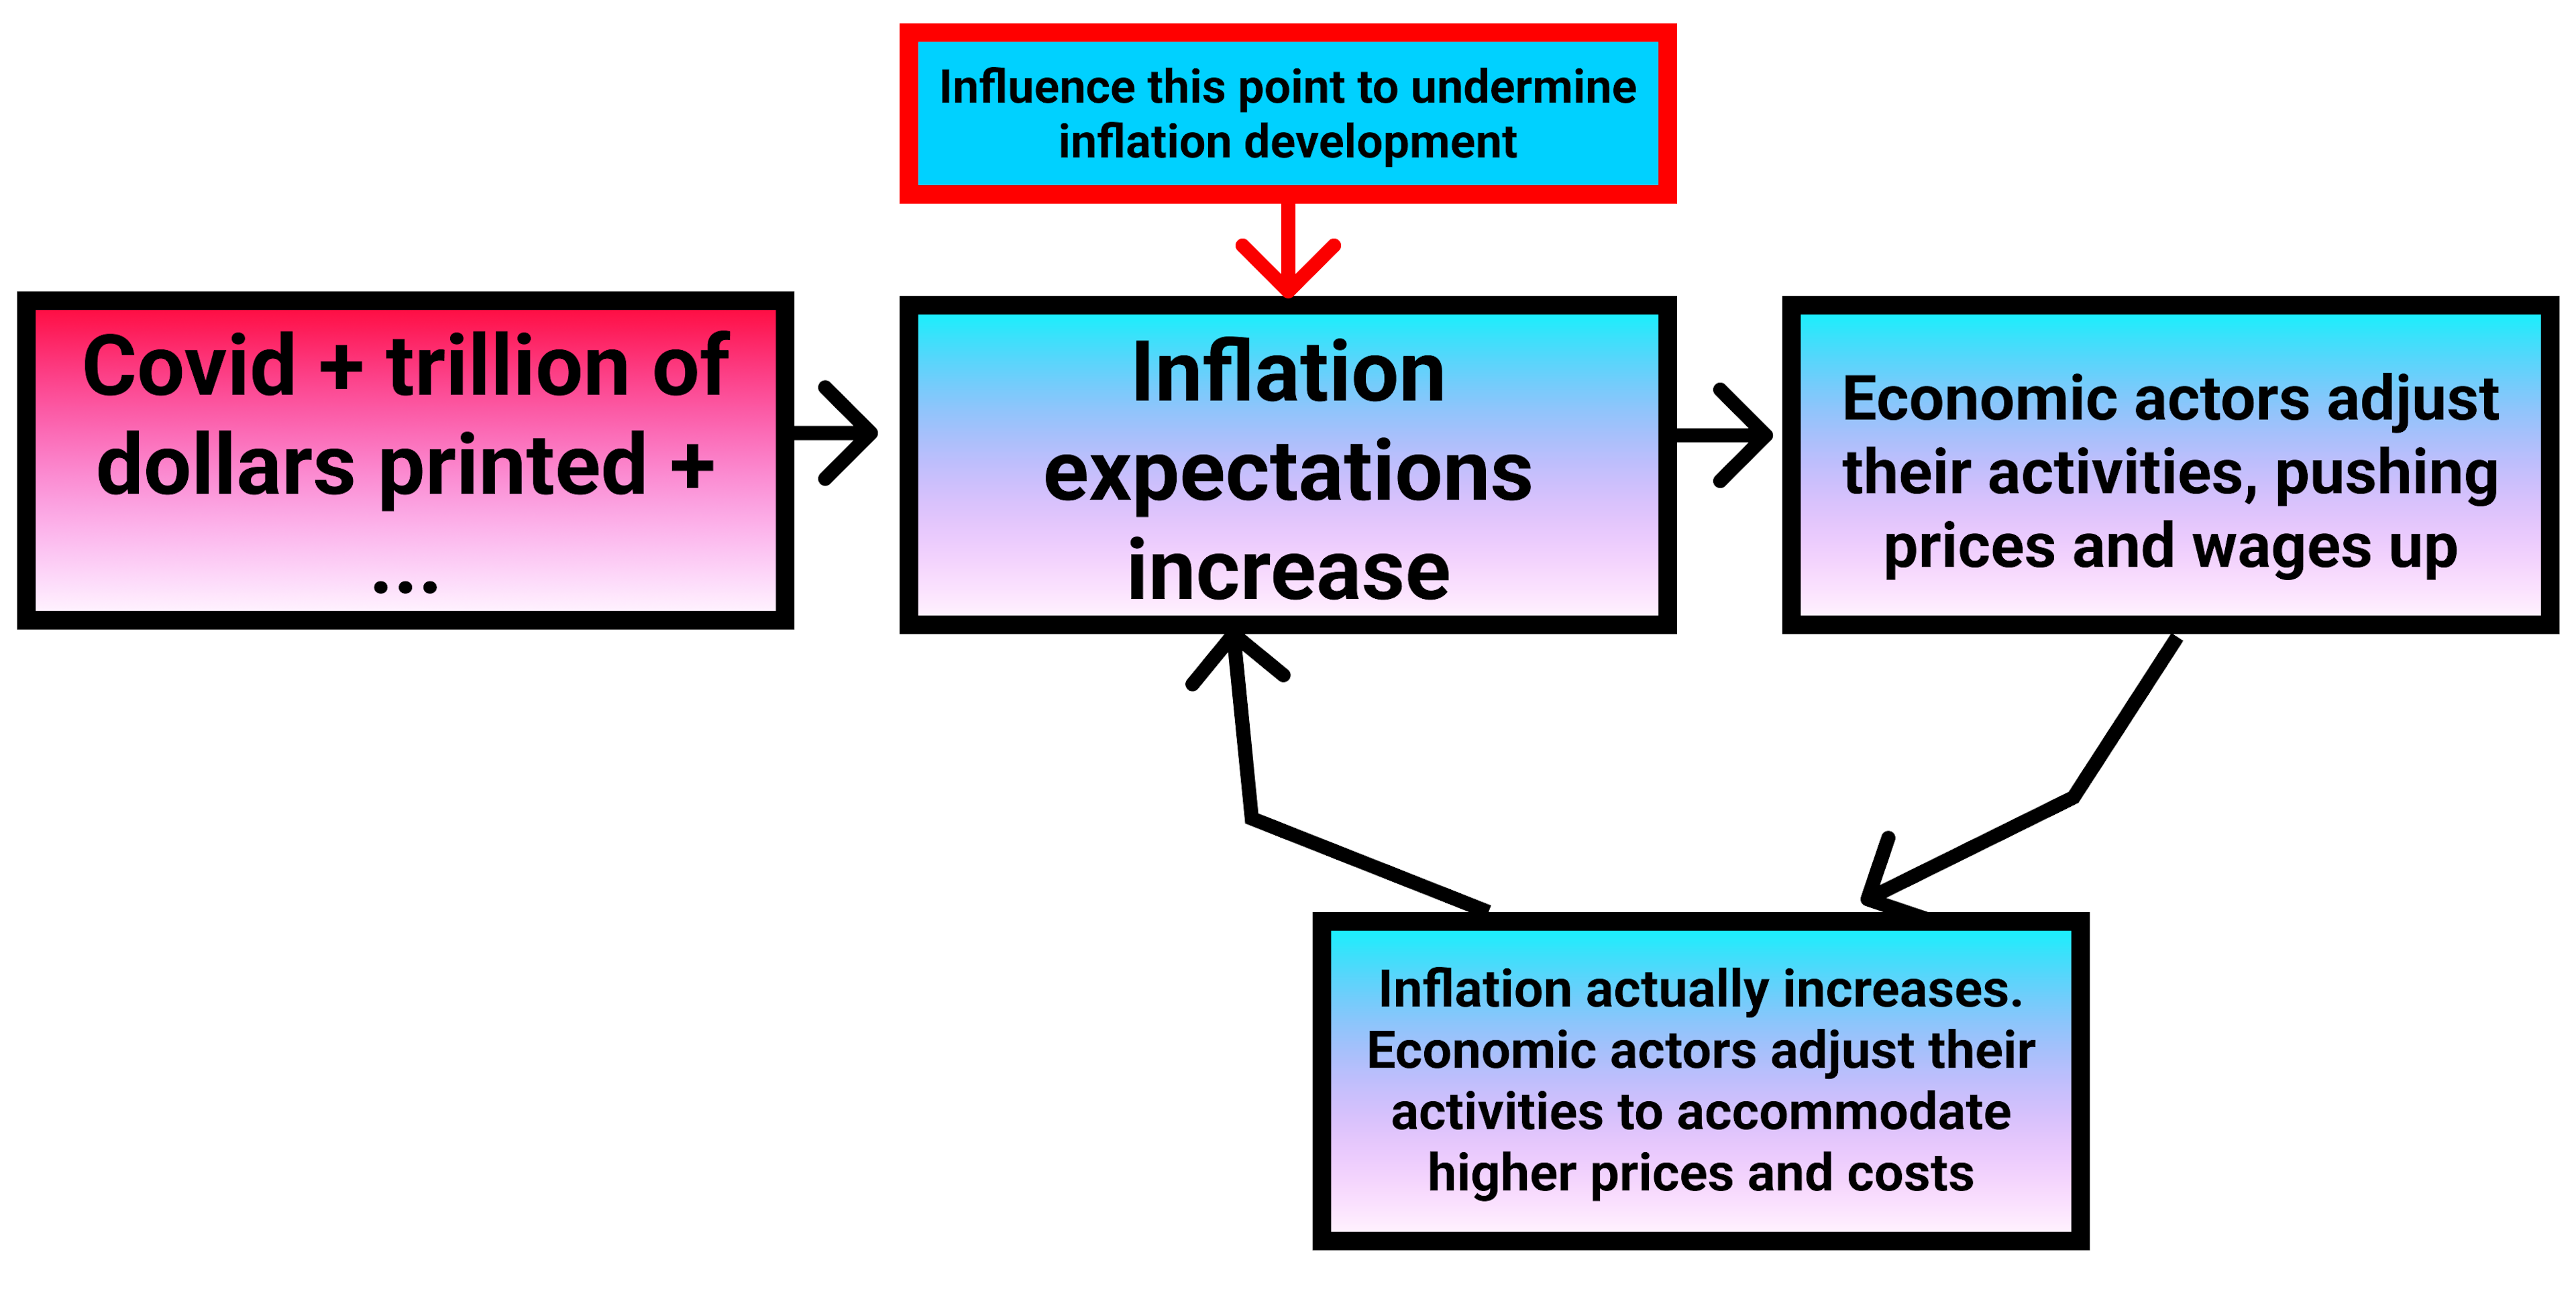 Simplification of the process in which inflation expectations can affect actual inflation.